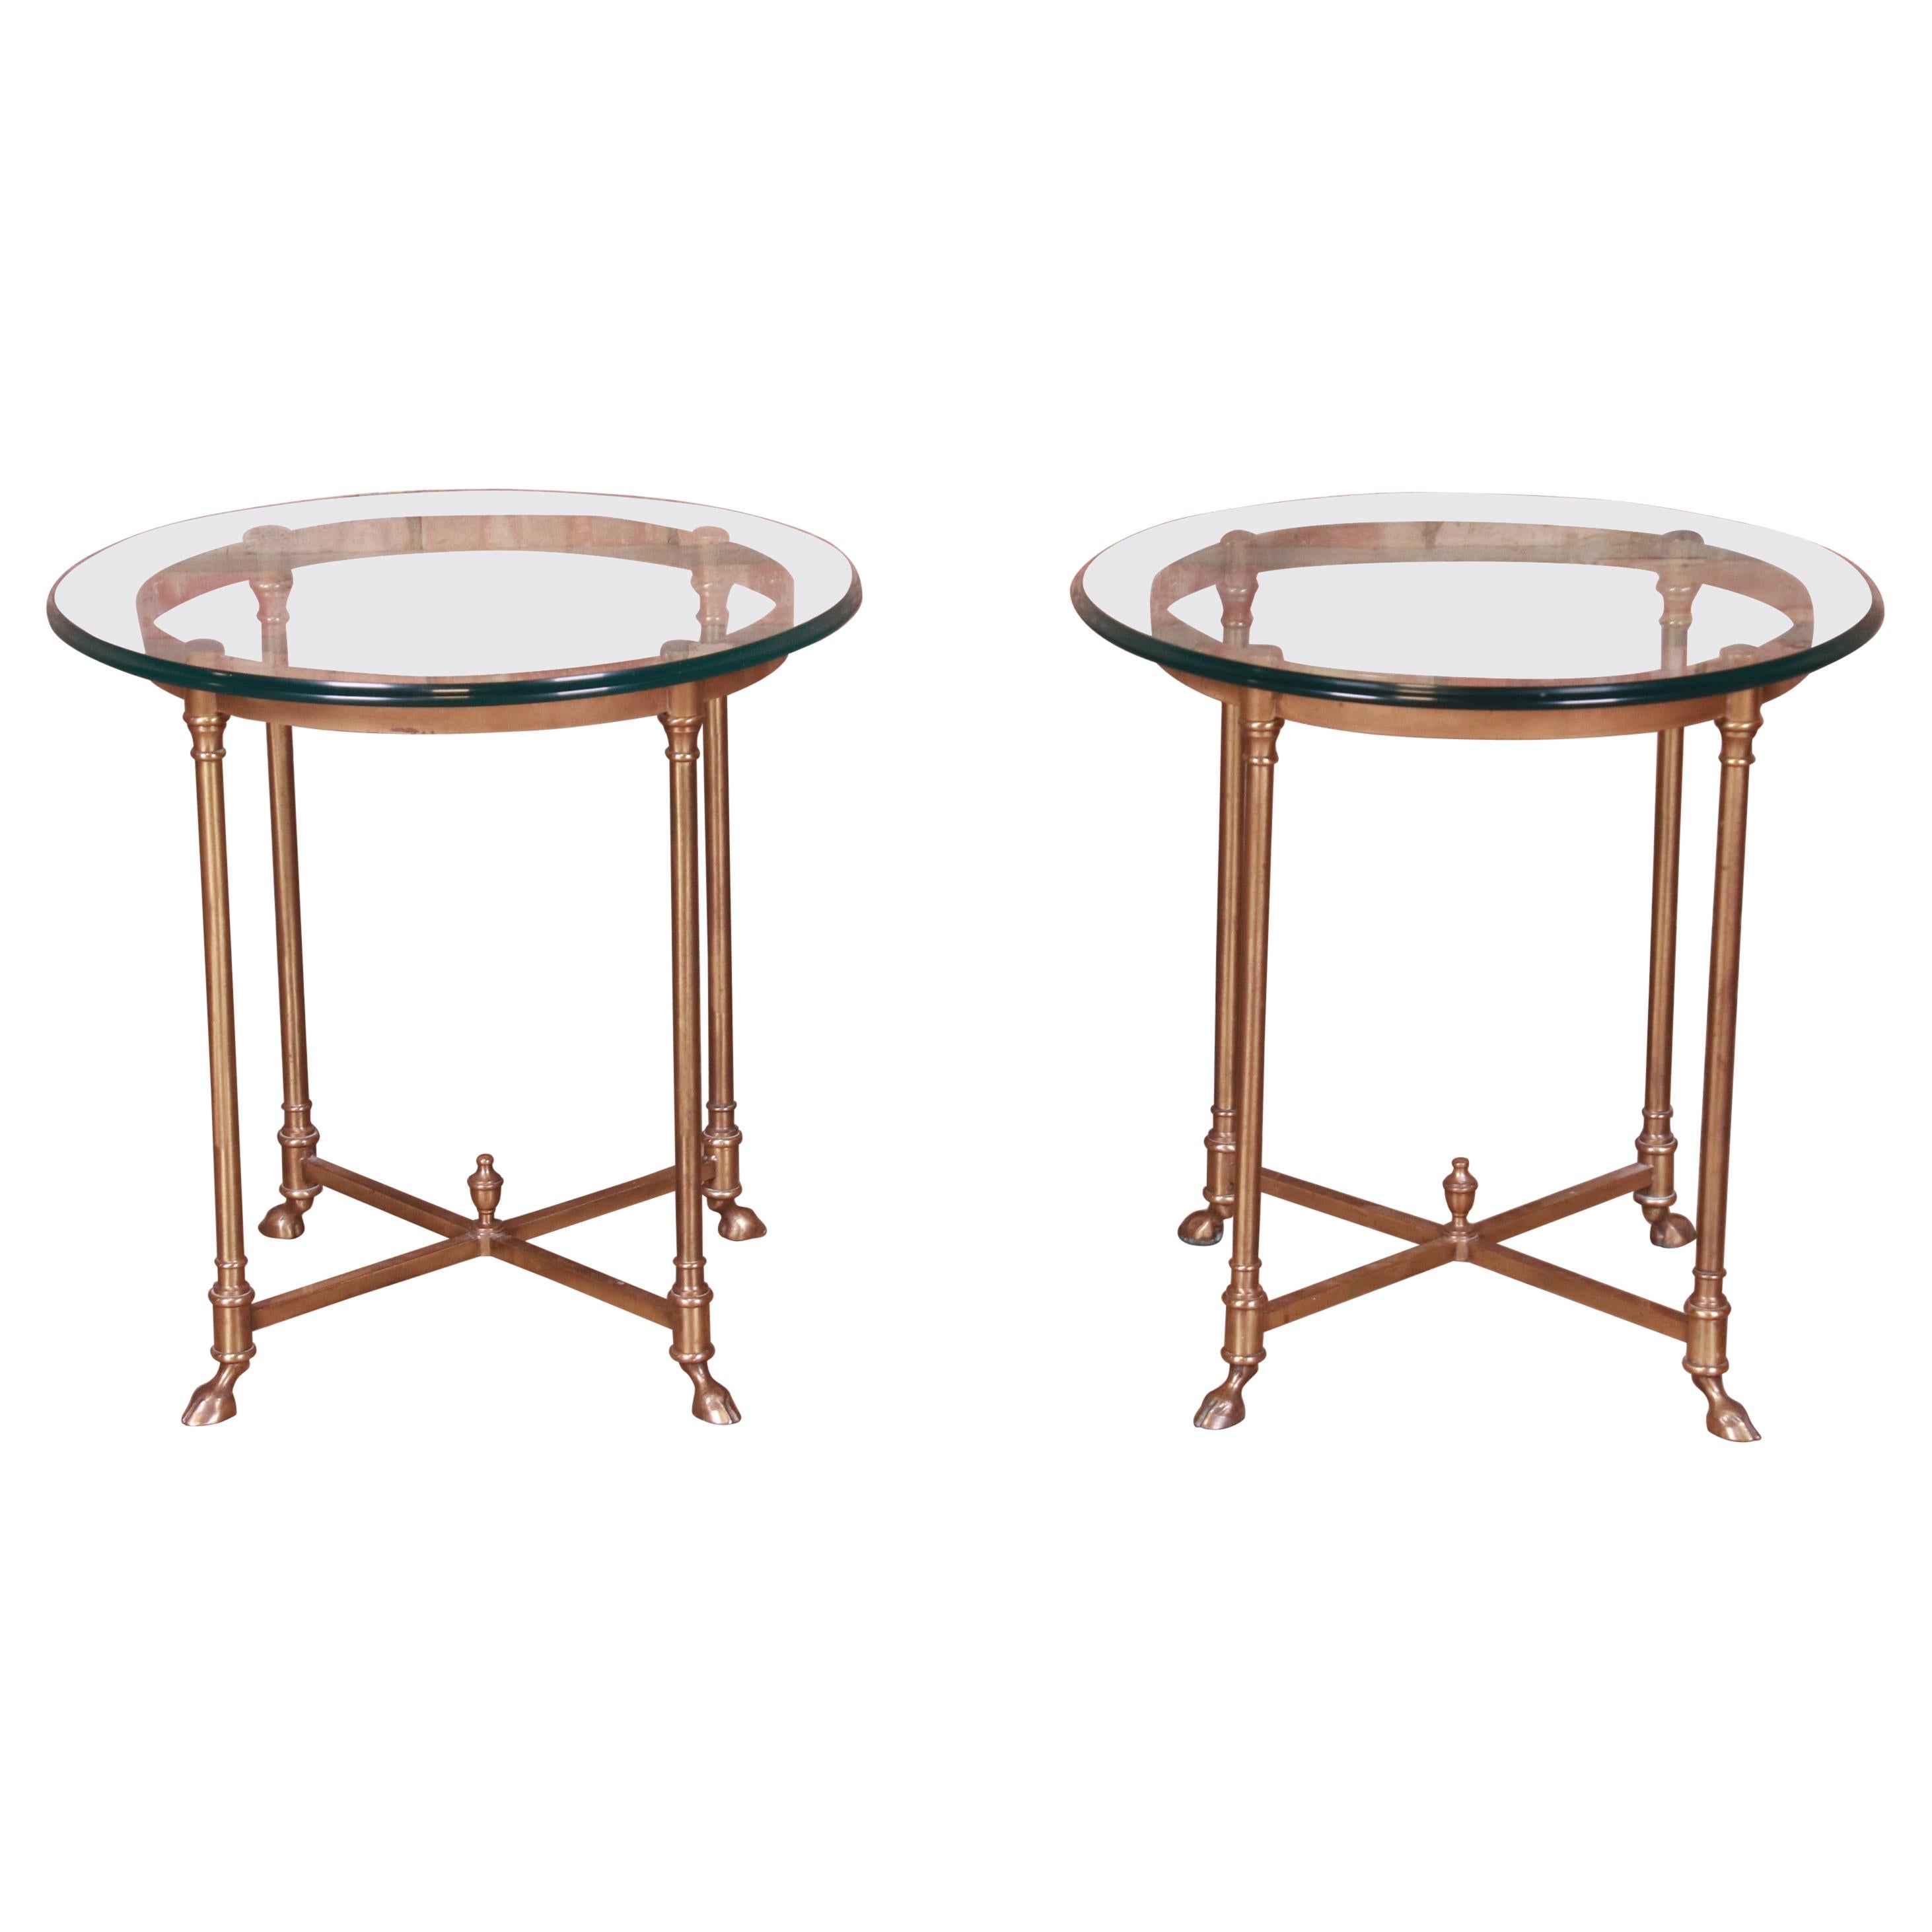 Labarge Italian Hollywood Regency Brass and Glass Side Tables with Hooved Feet